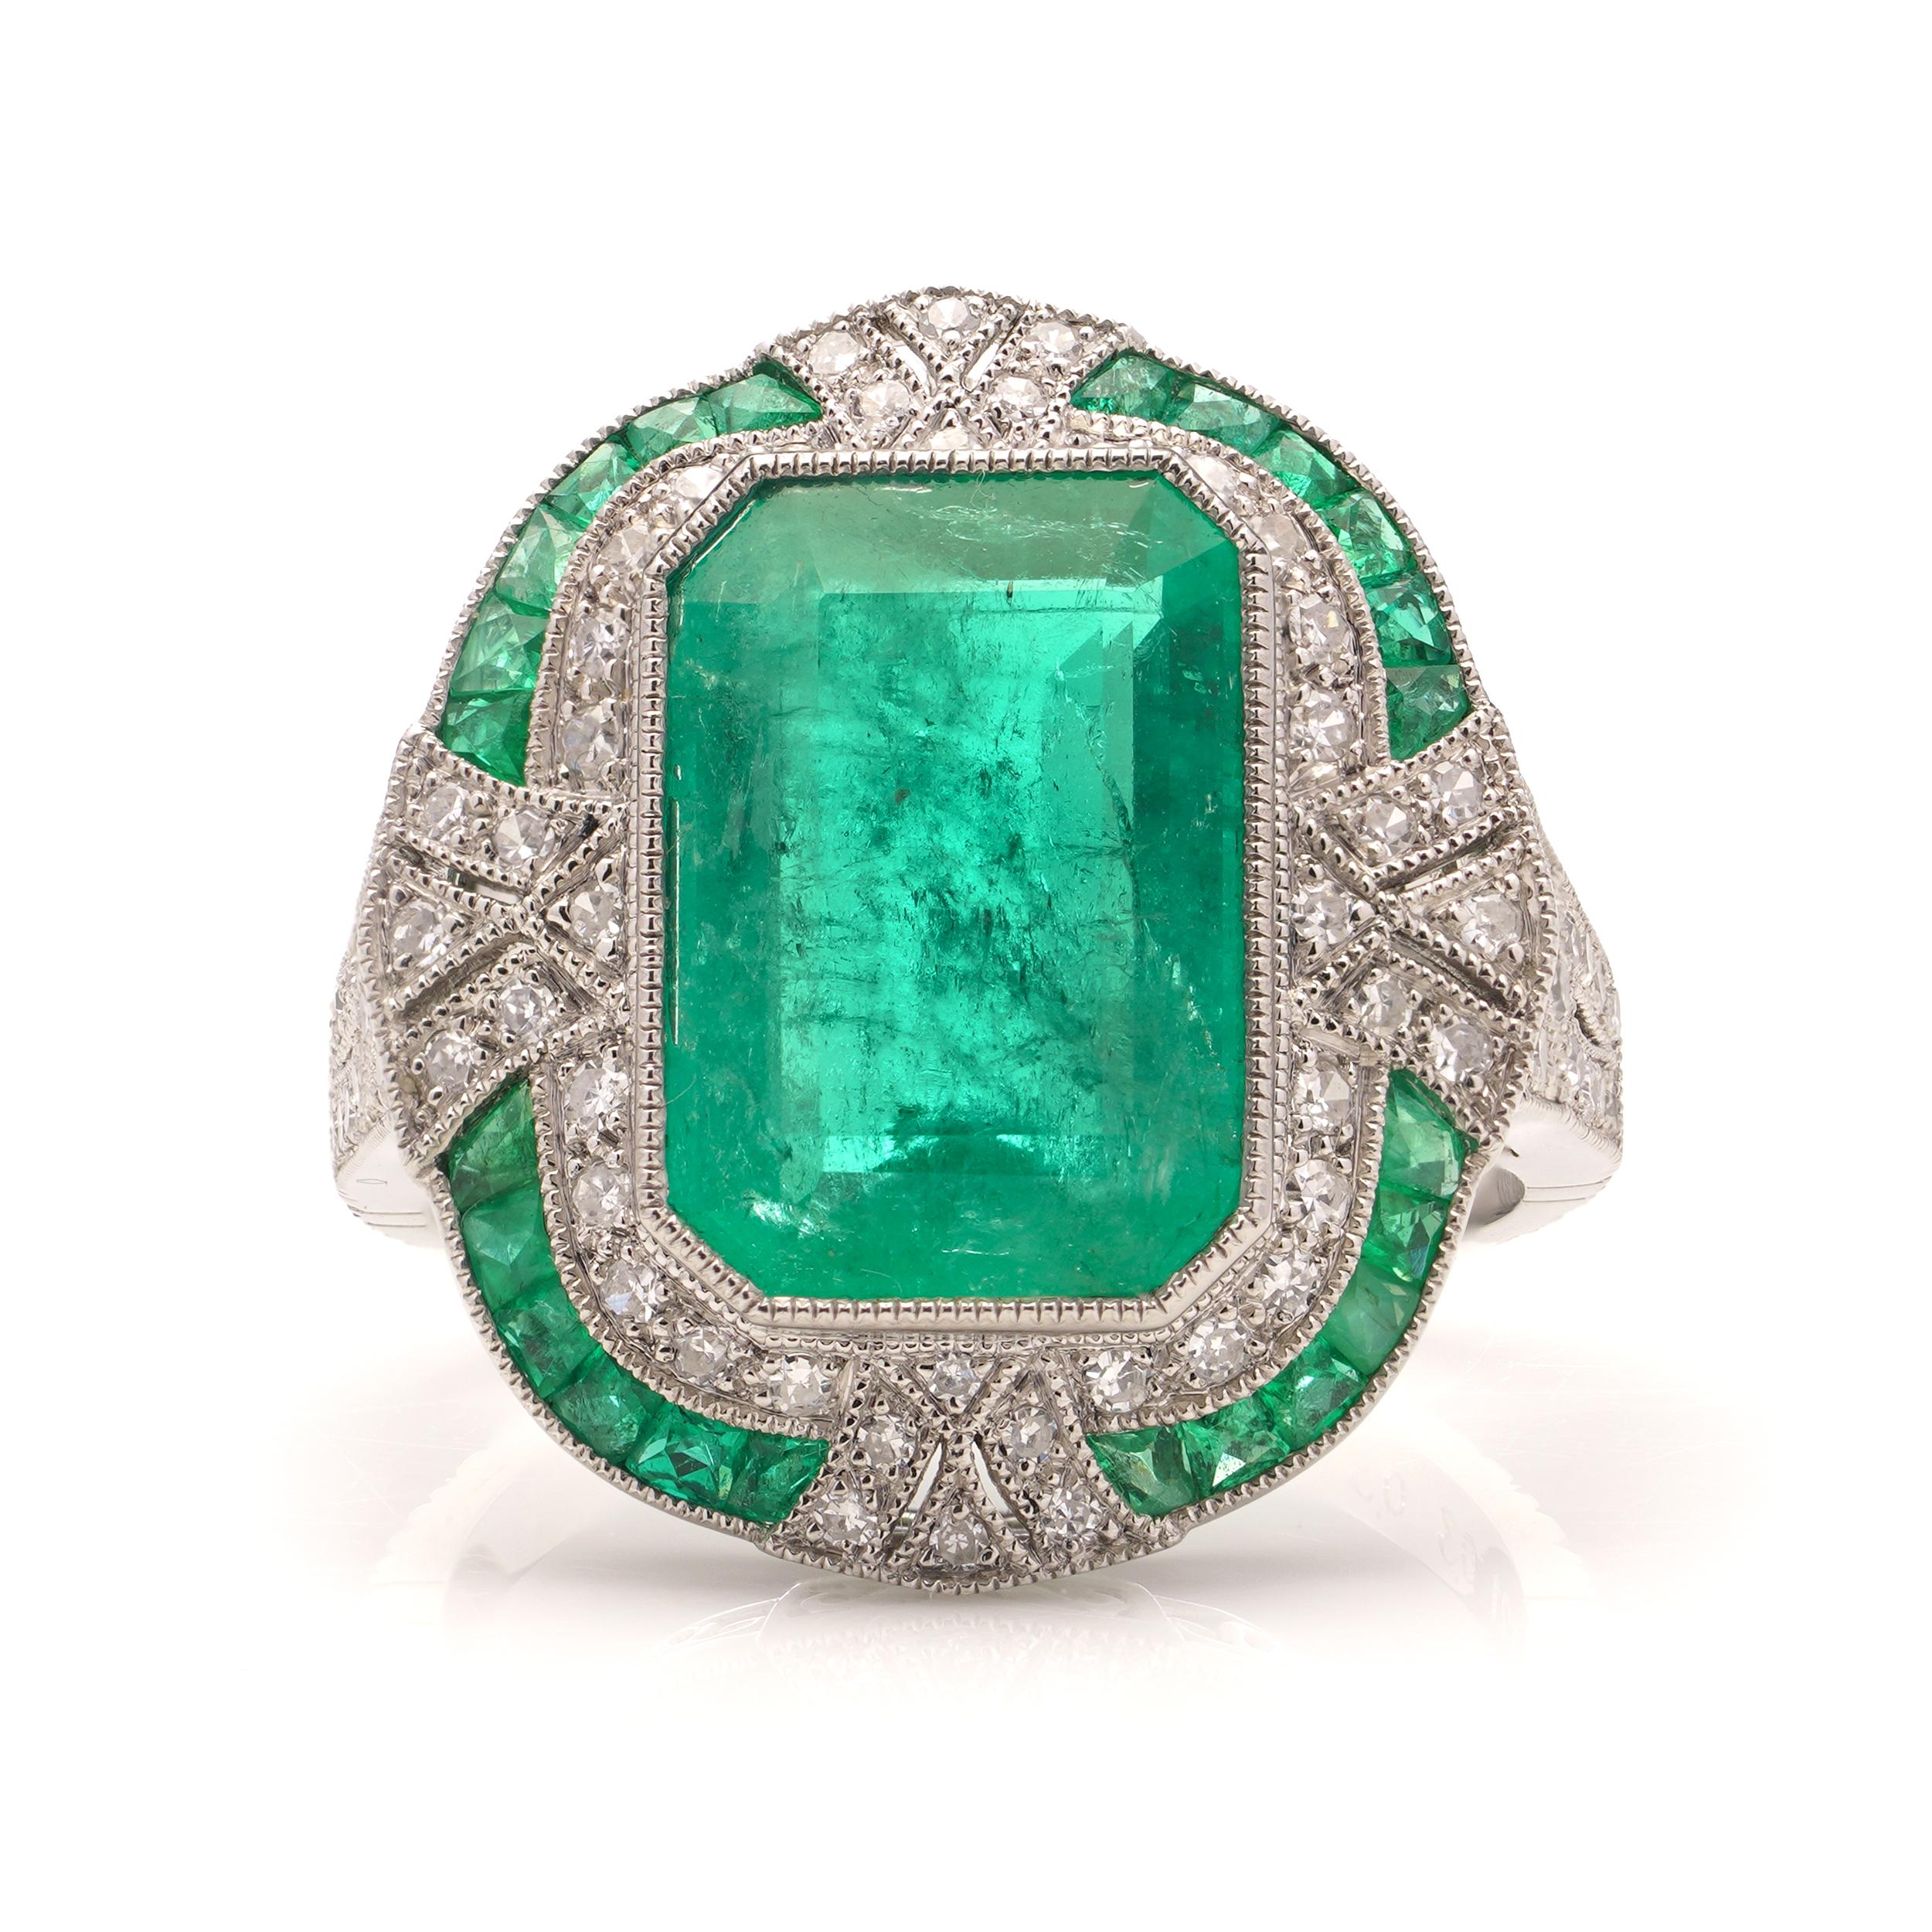 Platinum Art Deco-inspired 4.21 carats of Emerald fashion ring For Sale 4